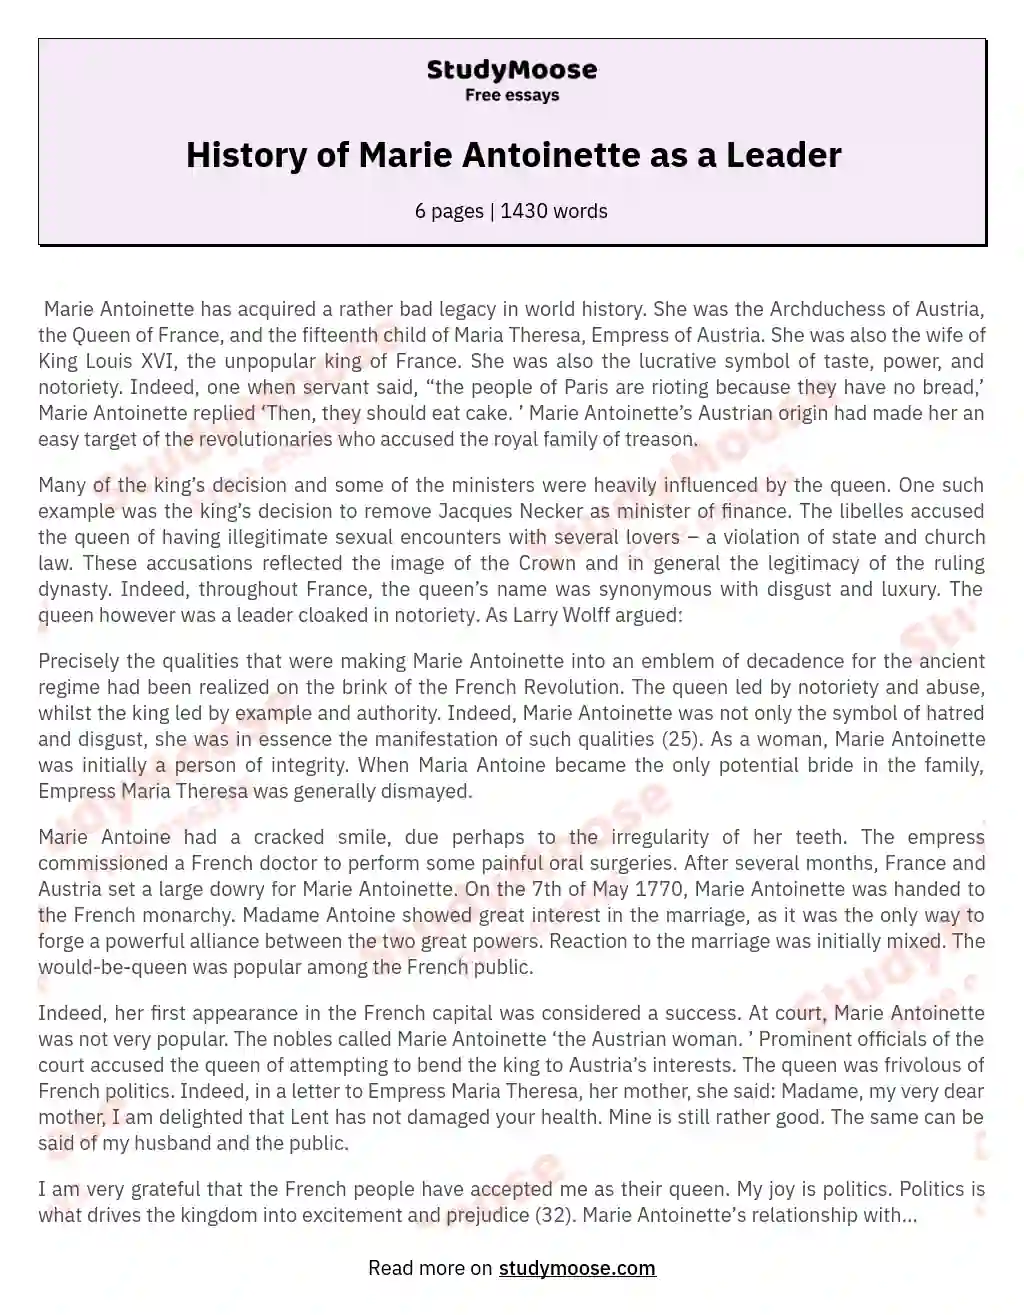 History of Marie Antoinette as a Leader essay